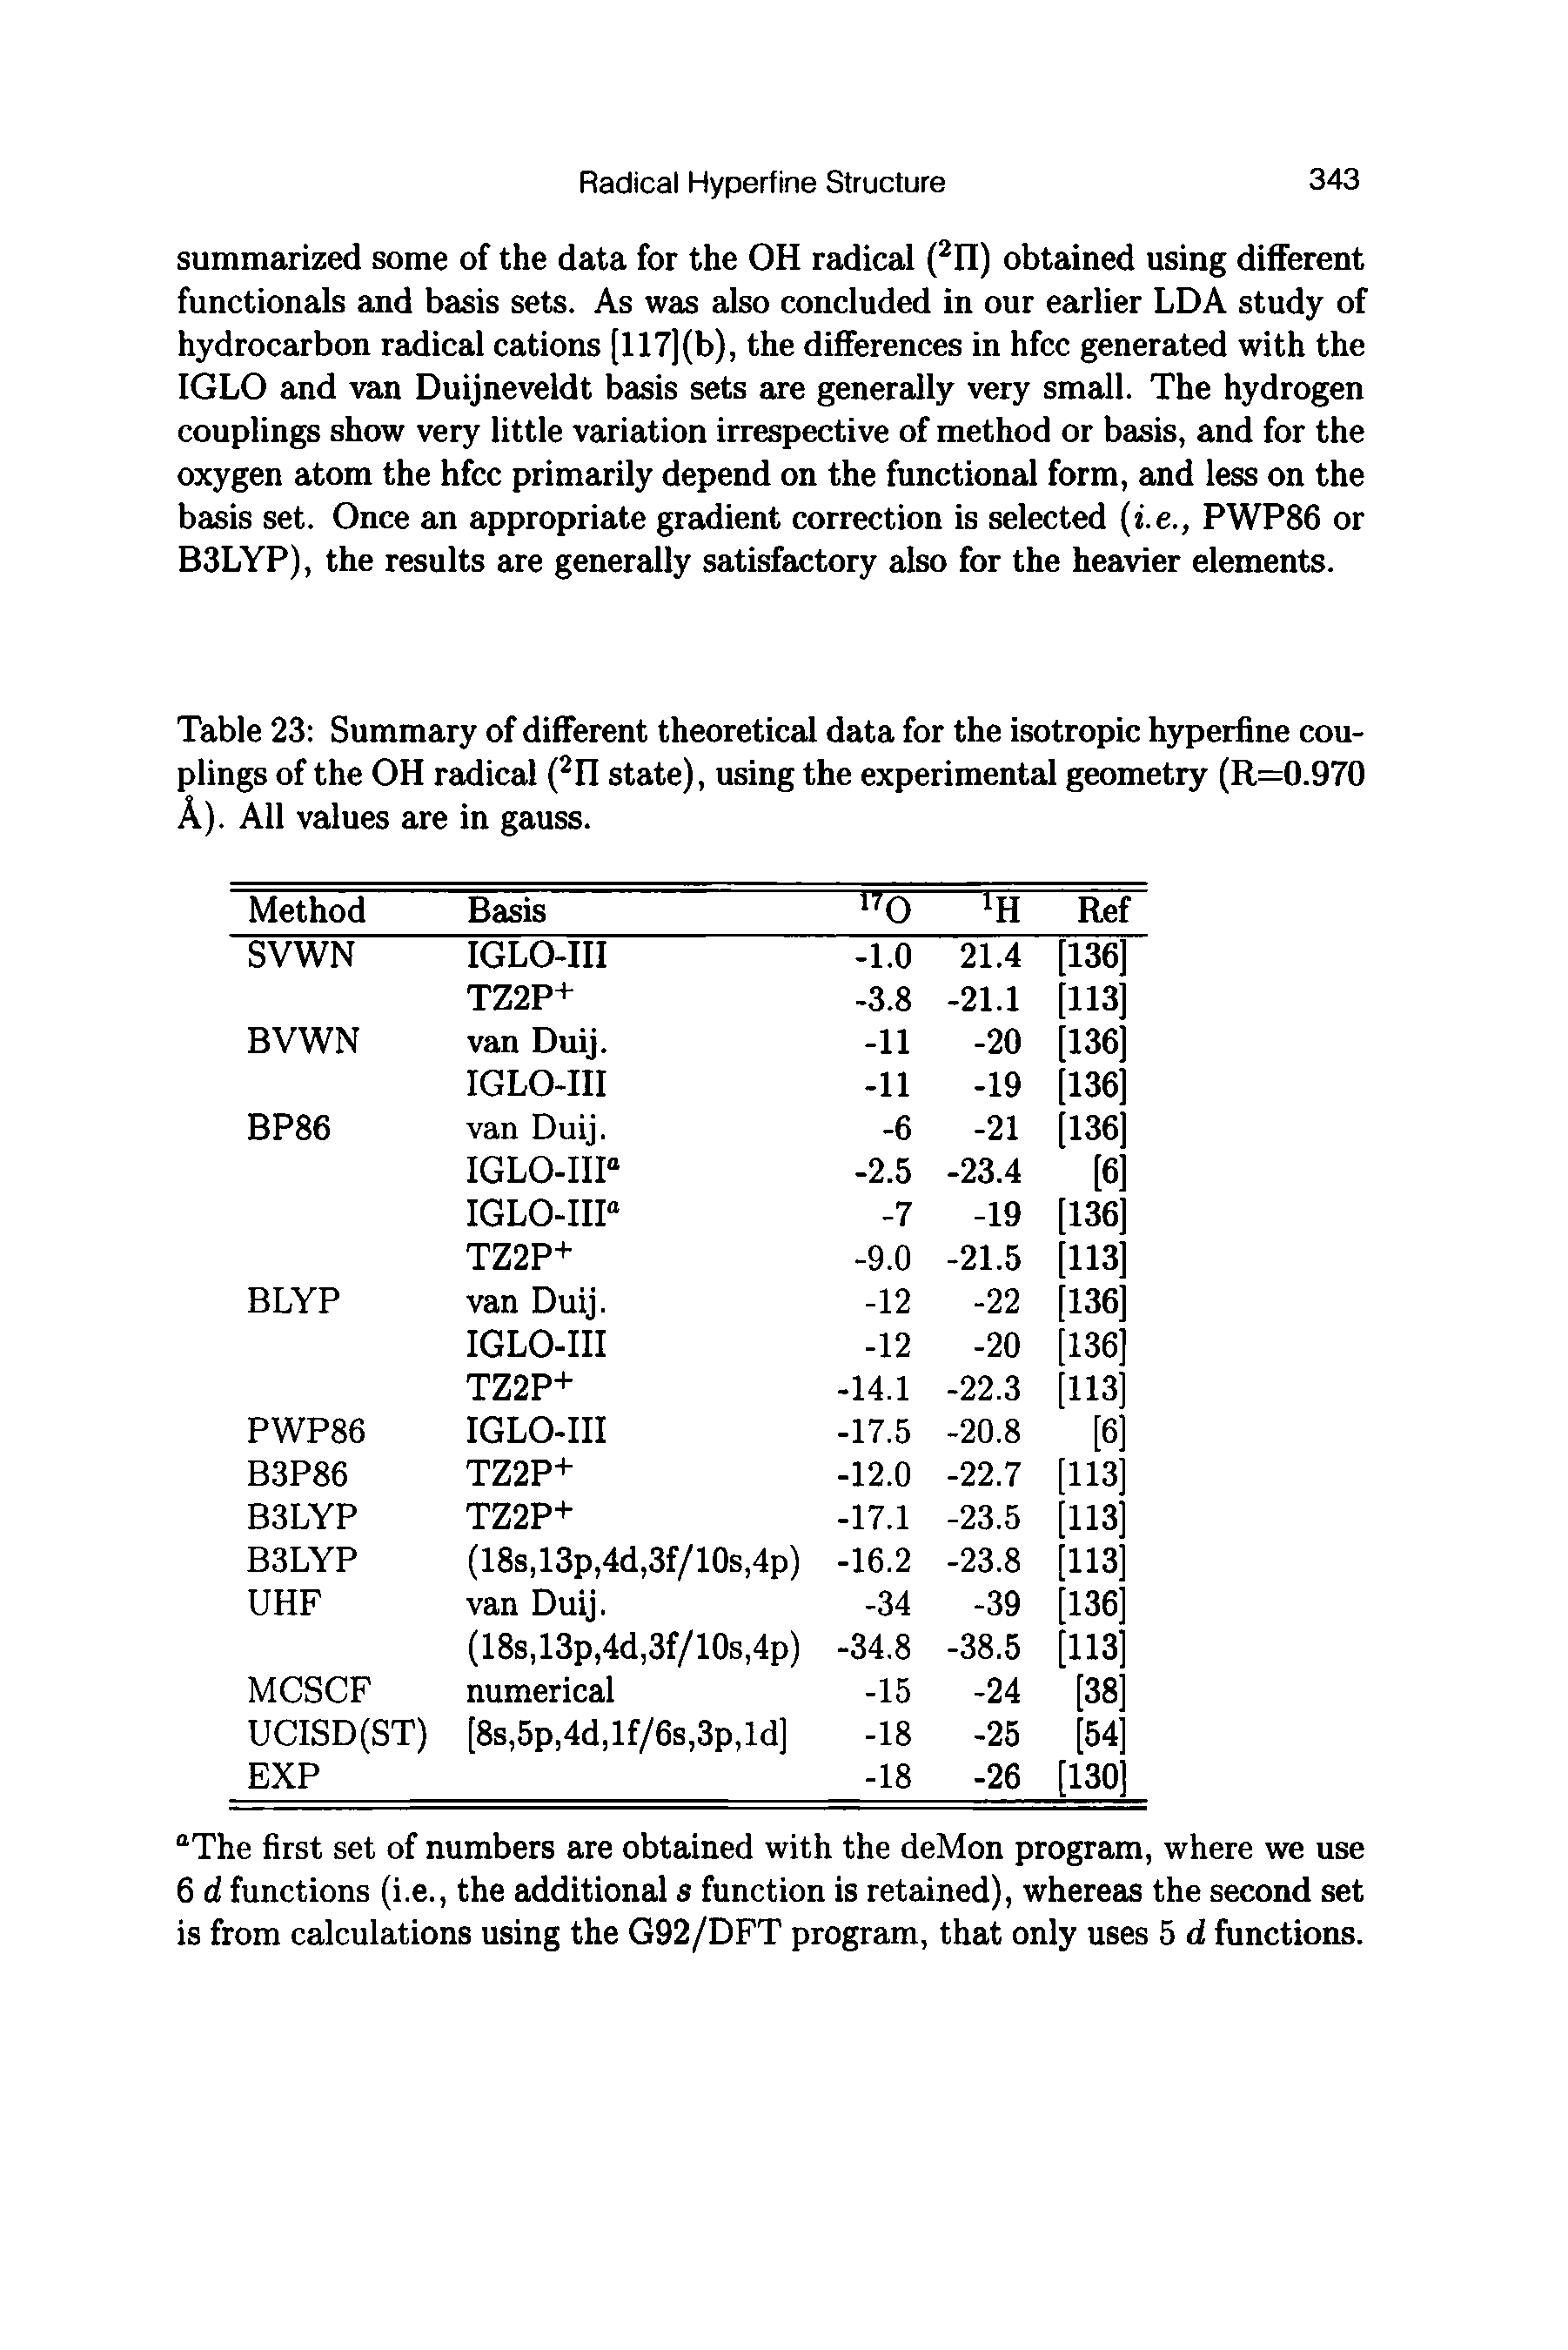 Table 23 Summary of different theoretical data for the isotropic hyperfine couplings of the OH radical (2n state), using the experimental geometry (R=0.970 A). All values are in gauss.